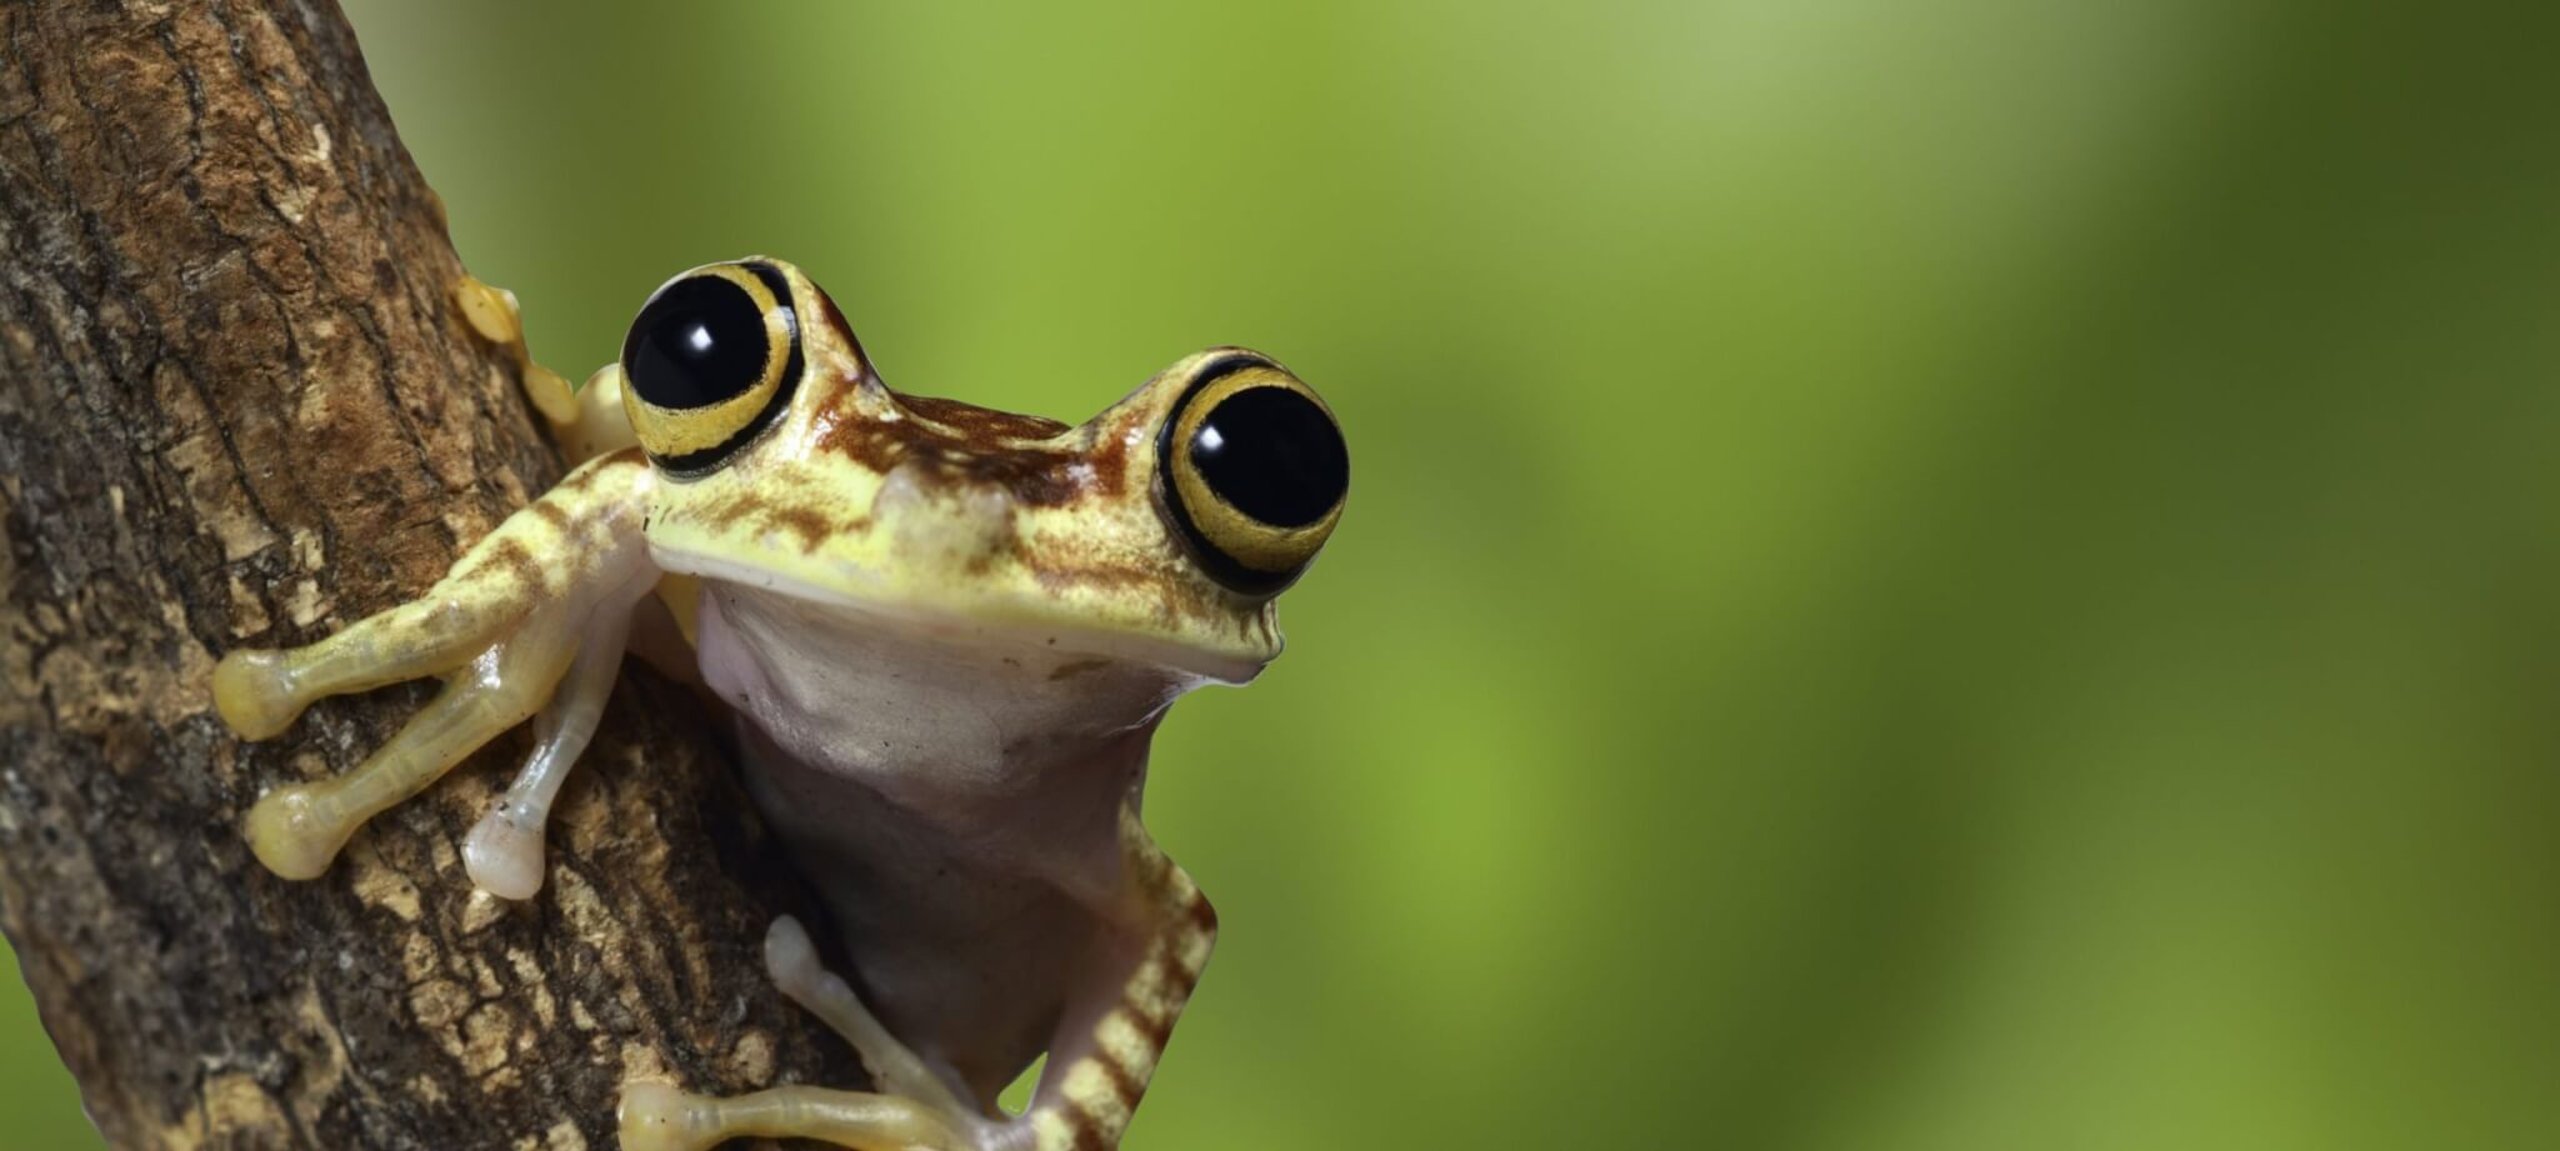 Save The Frogs Day (24th April, 2021) Days Of The Year